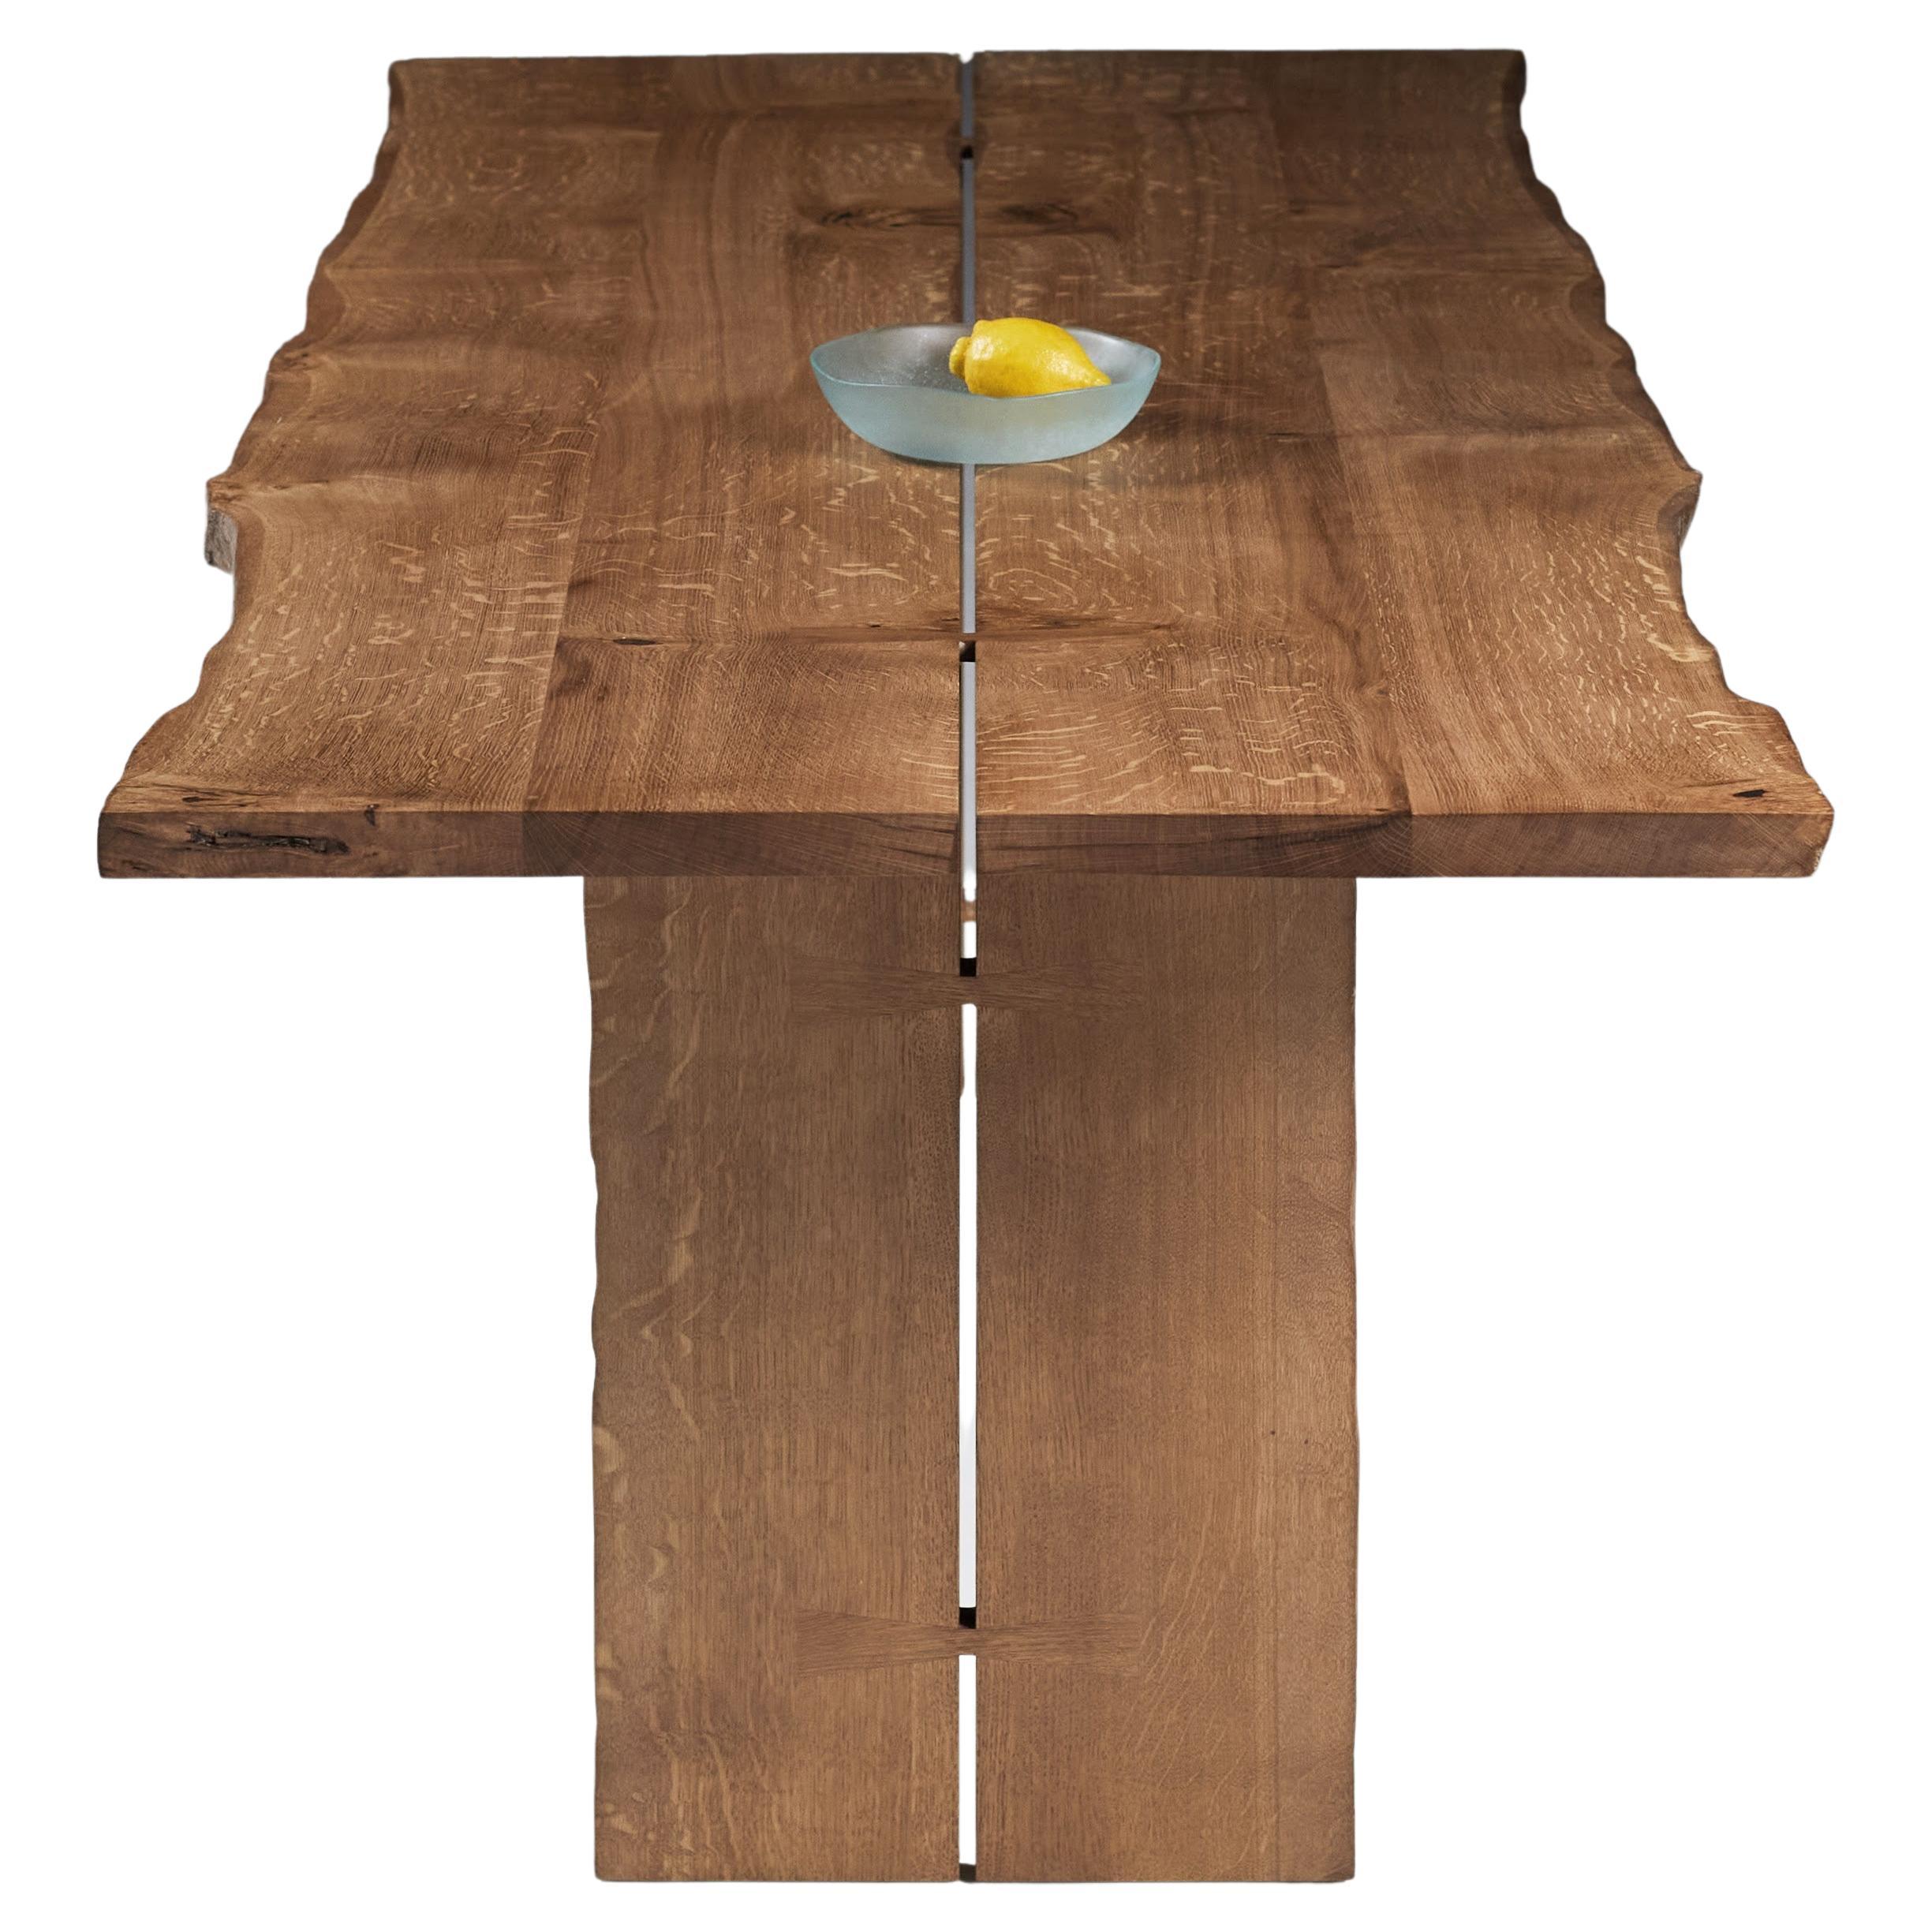 The 'Additions' butterfly joined table with live-edge English Oak.